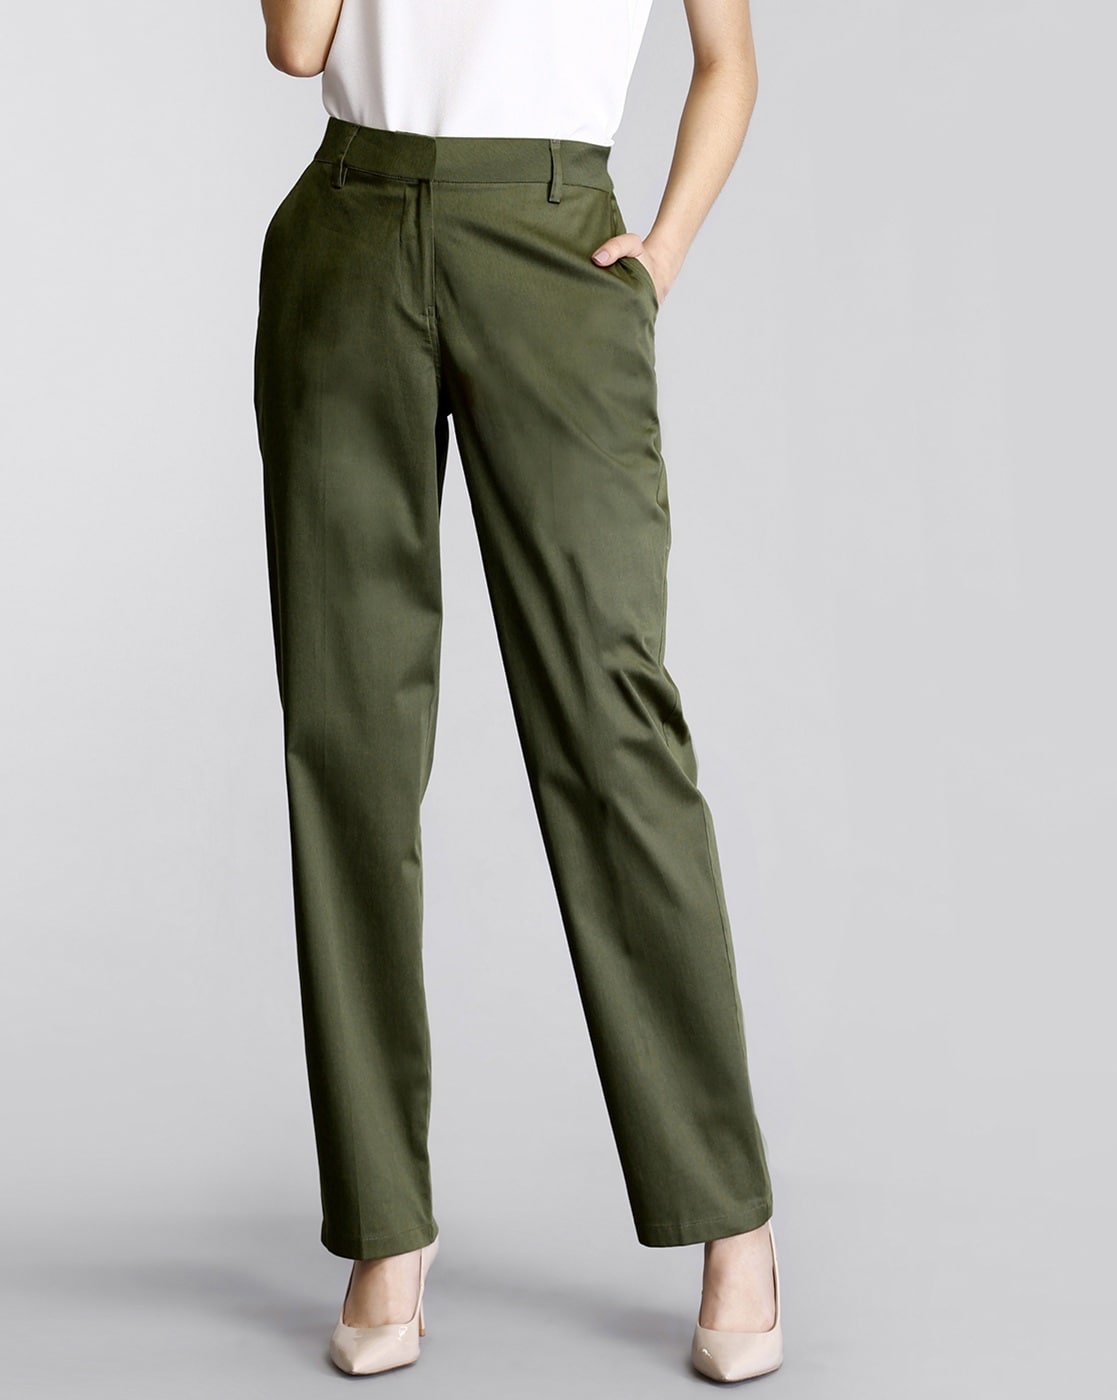 Olive Cotton and Linen Dress Pant - Custom Fit Tailored Clothing